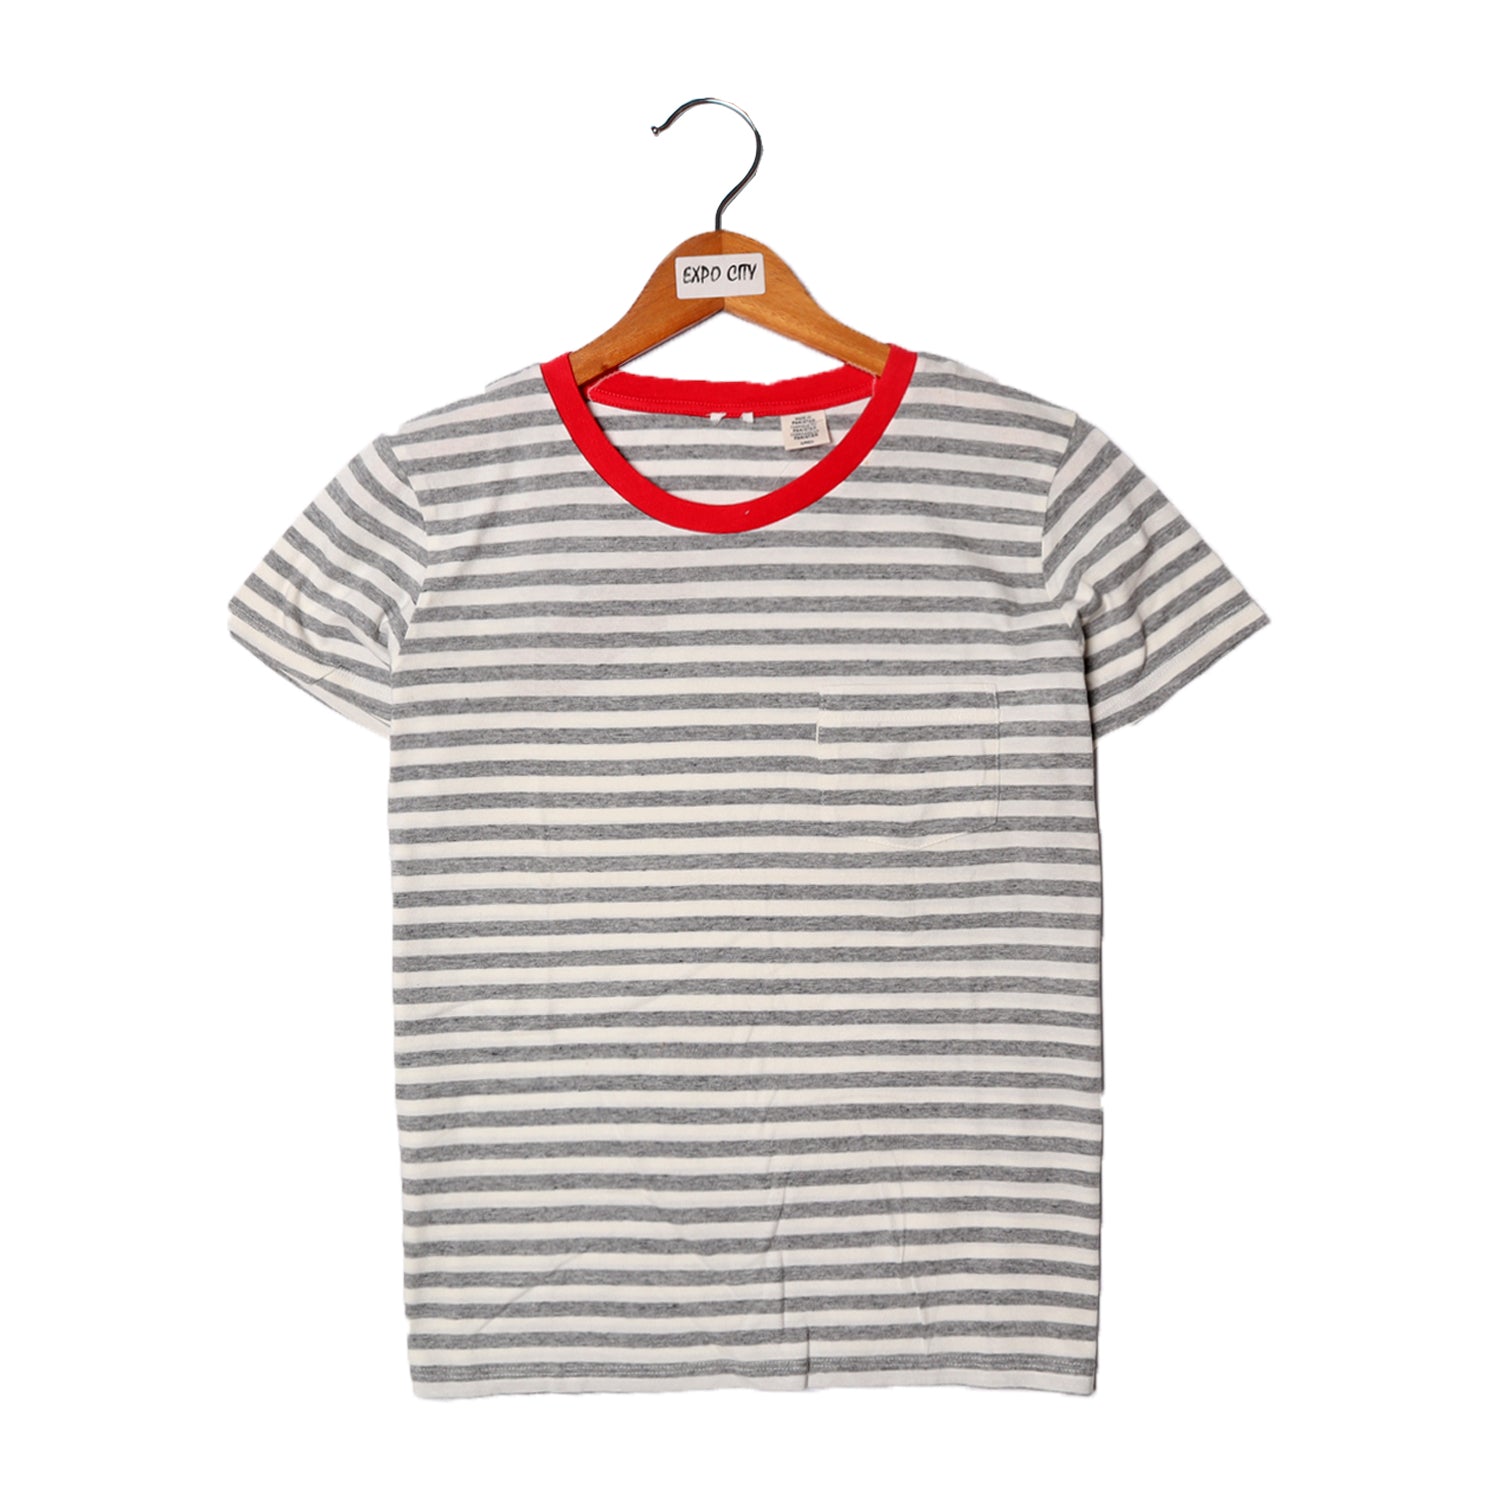 NEW WHITE WITH GREY STRIPES & POCKET HALF SLEEVES T-SHIRT FOR GIRLS